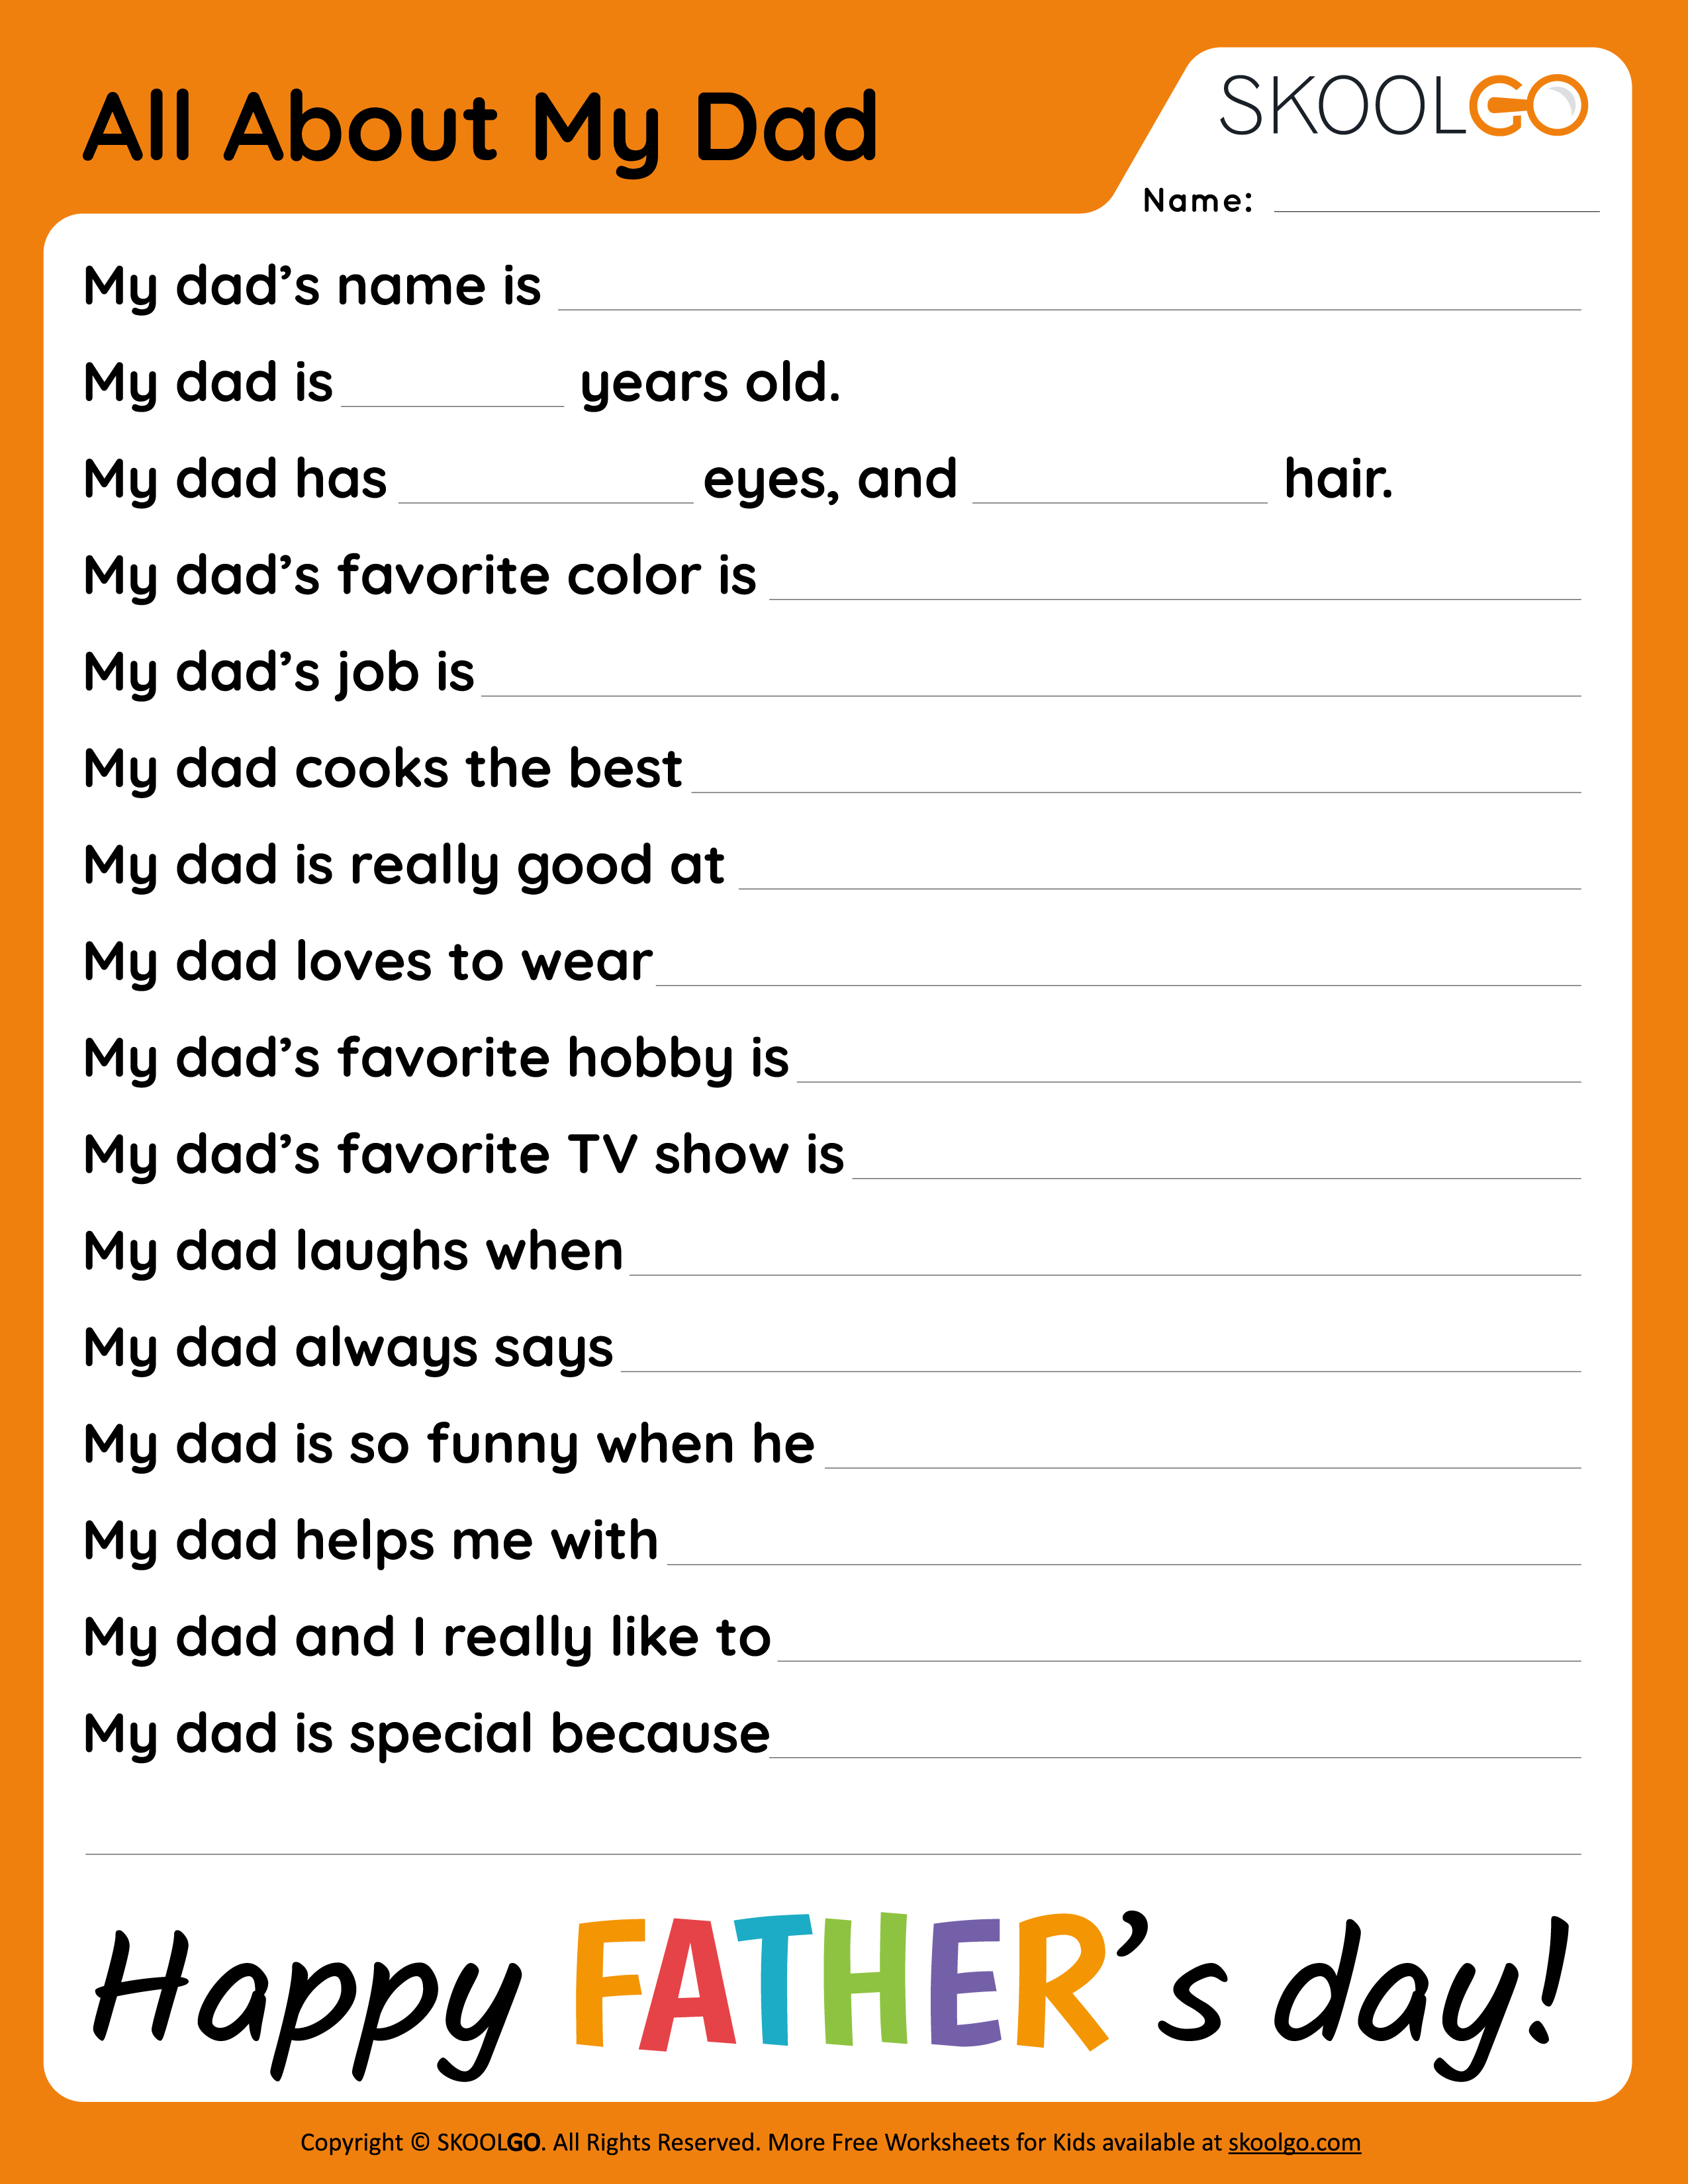 All About My Dad 1 - Free Worksheet for Kids